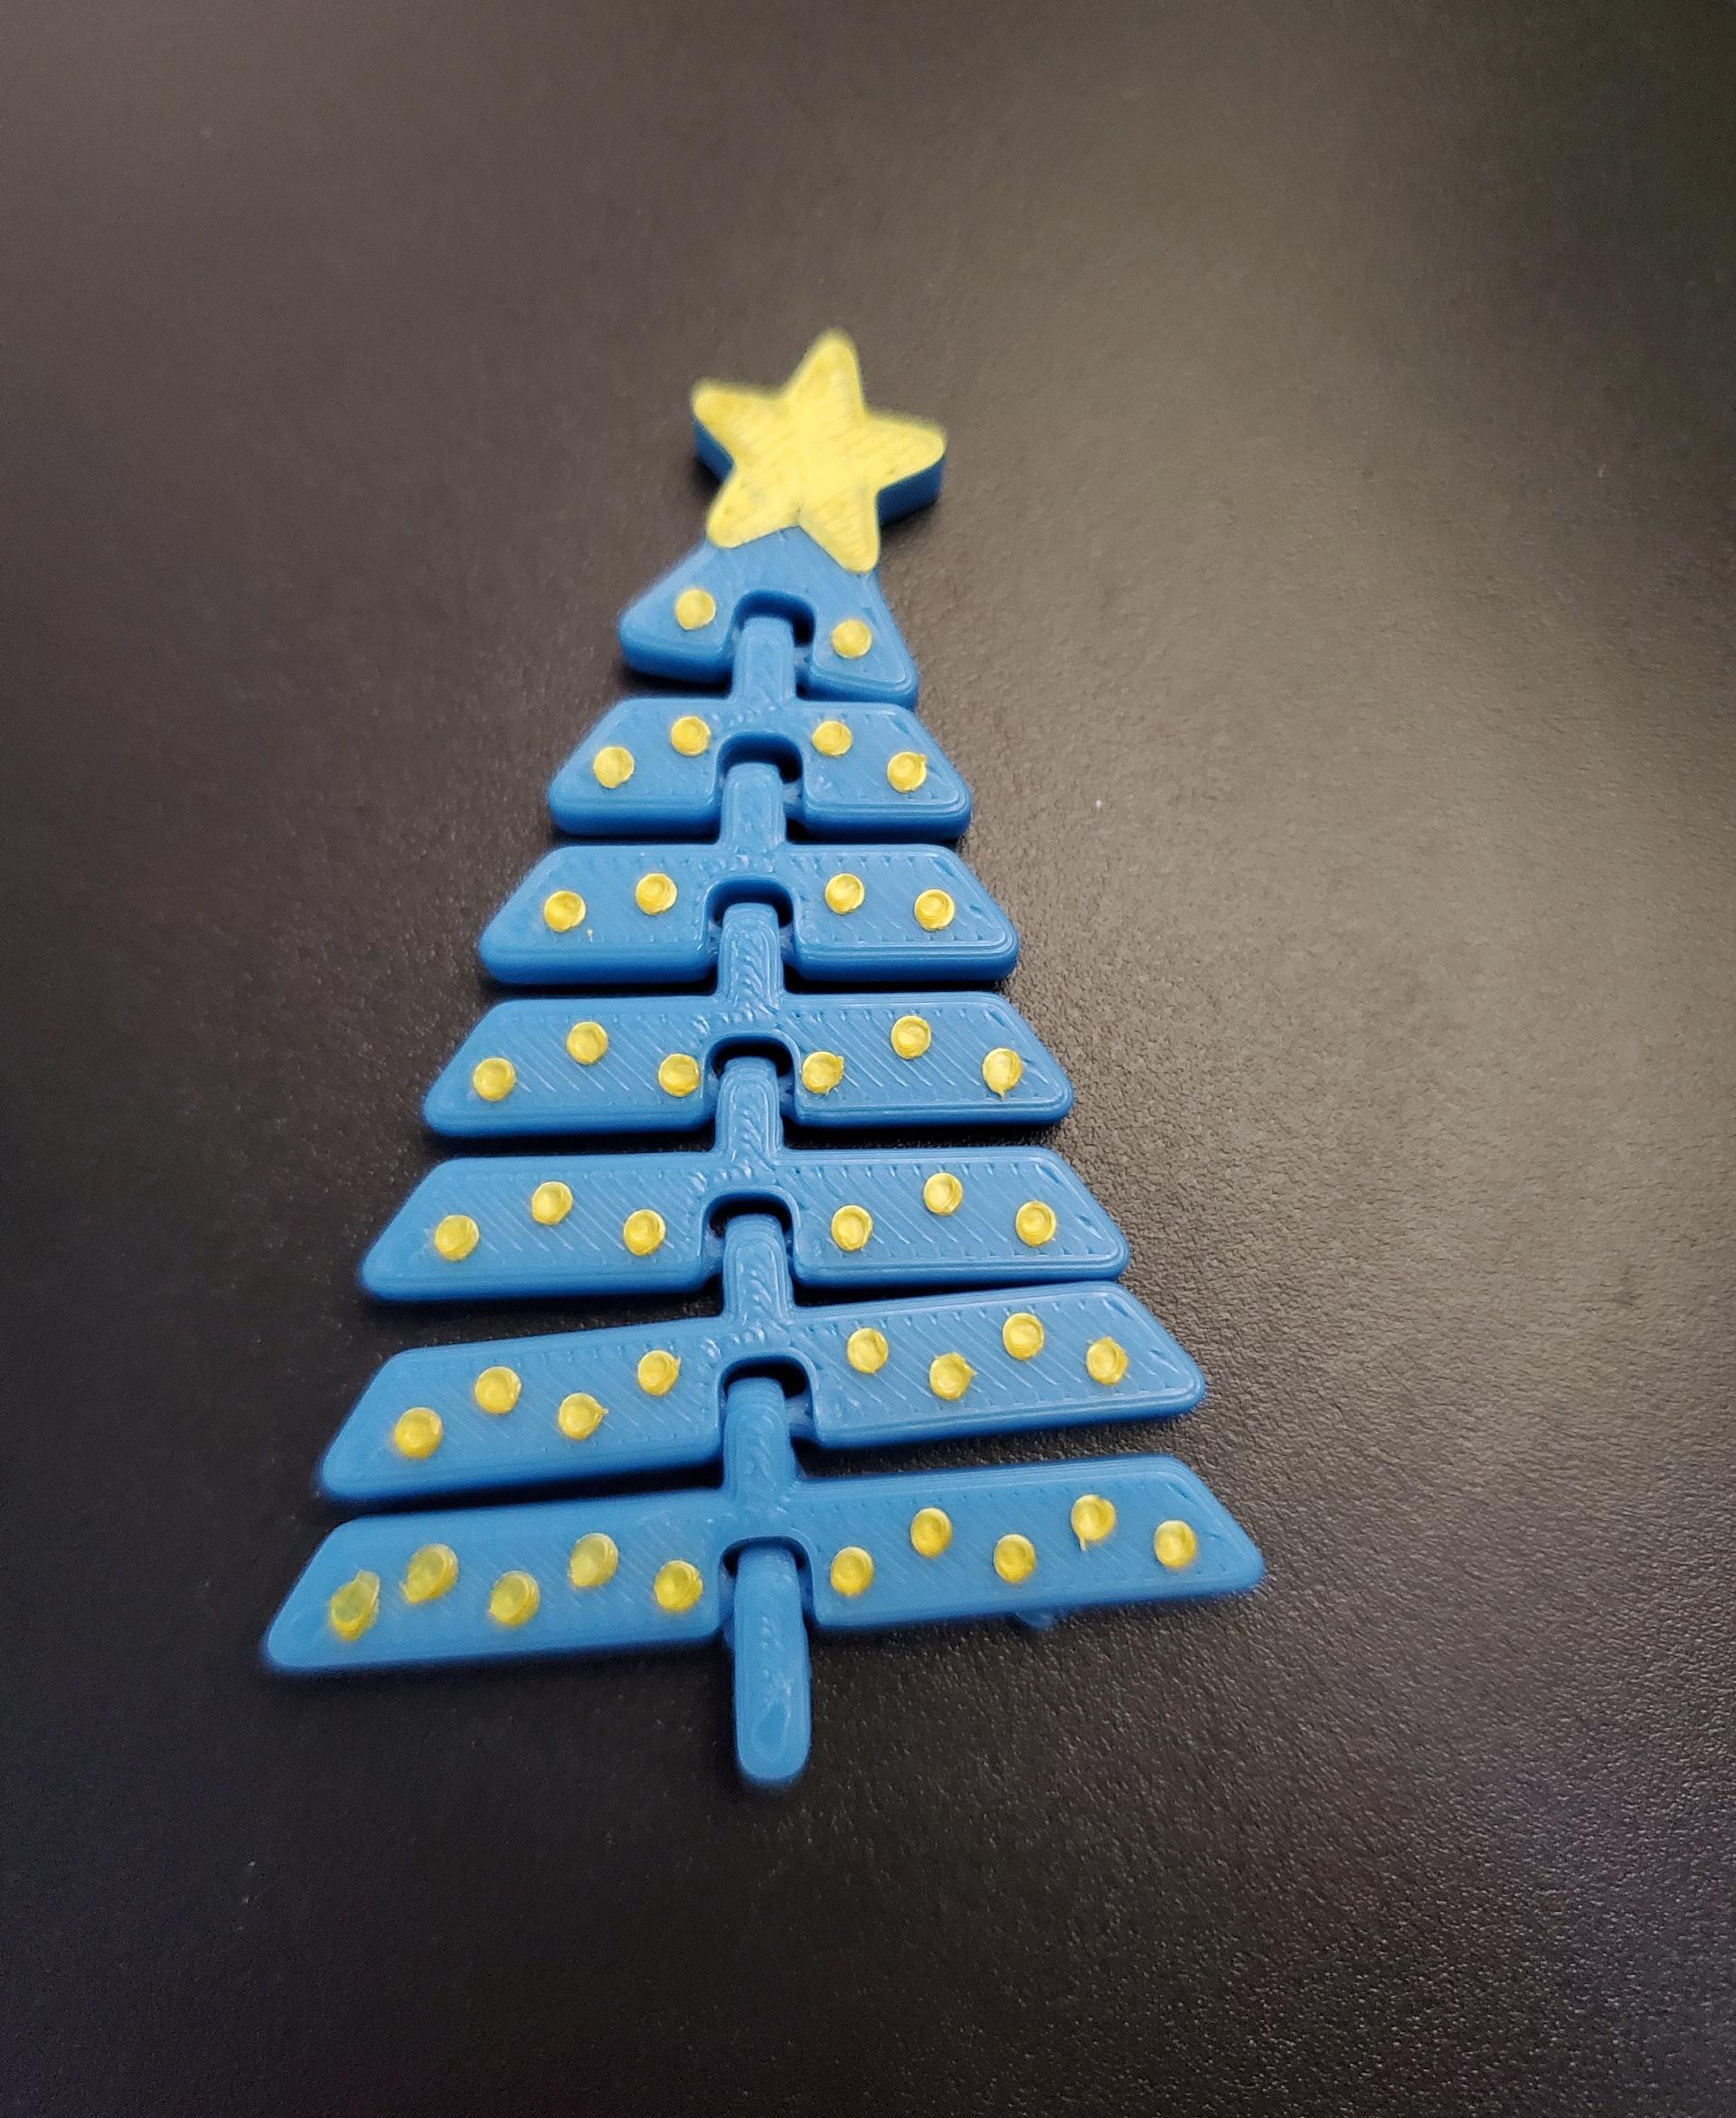 Articulated Christmas Tree with Star and Ornaments - Print in place fidget toys - 3mf - hobbyking sky blue - 3d model